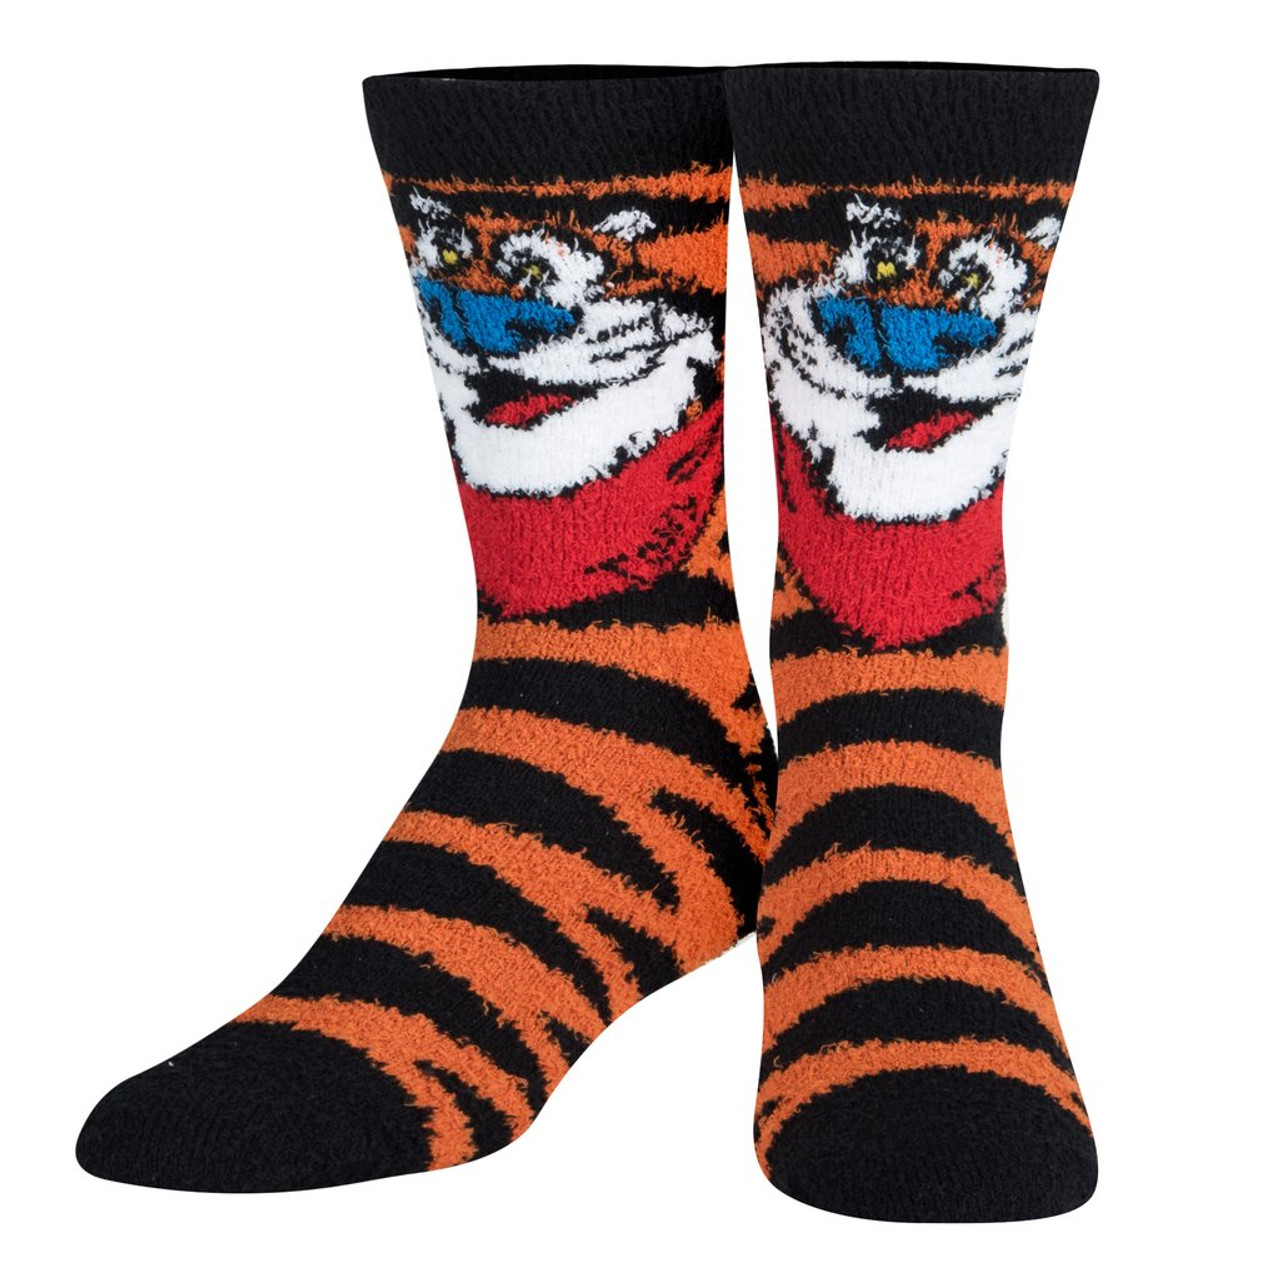 Frosted Flakes Tony the Tiger Faces Men's Crew Socks by Cool Socks